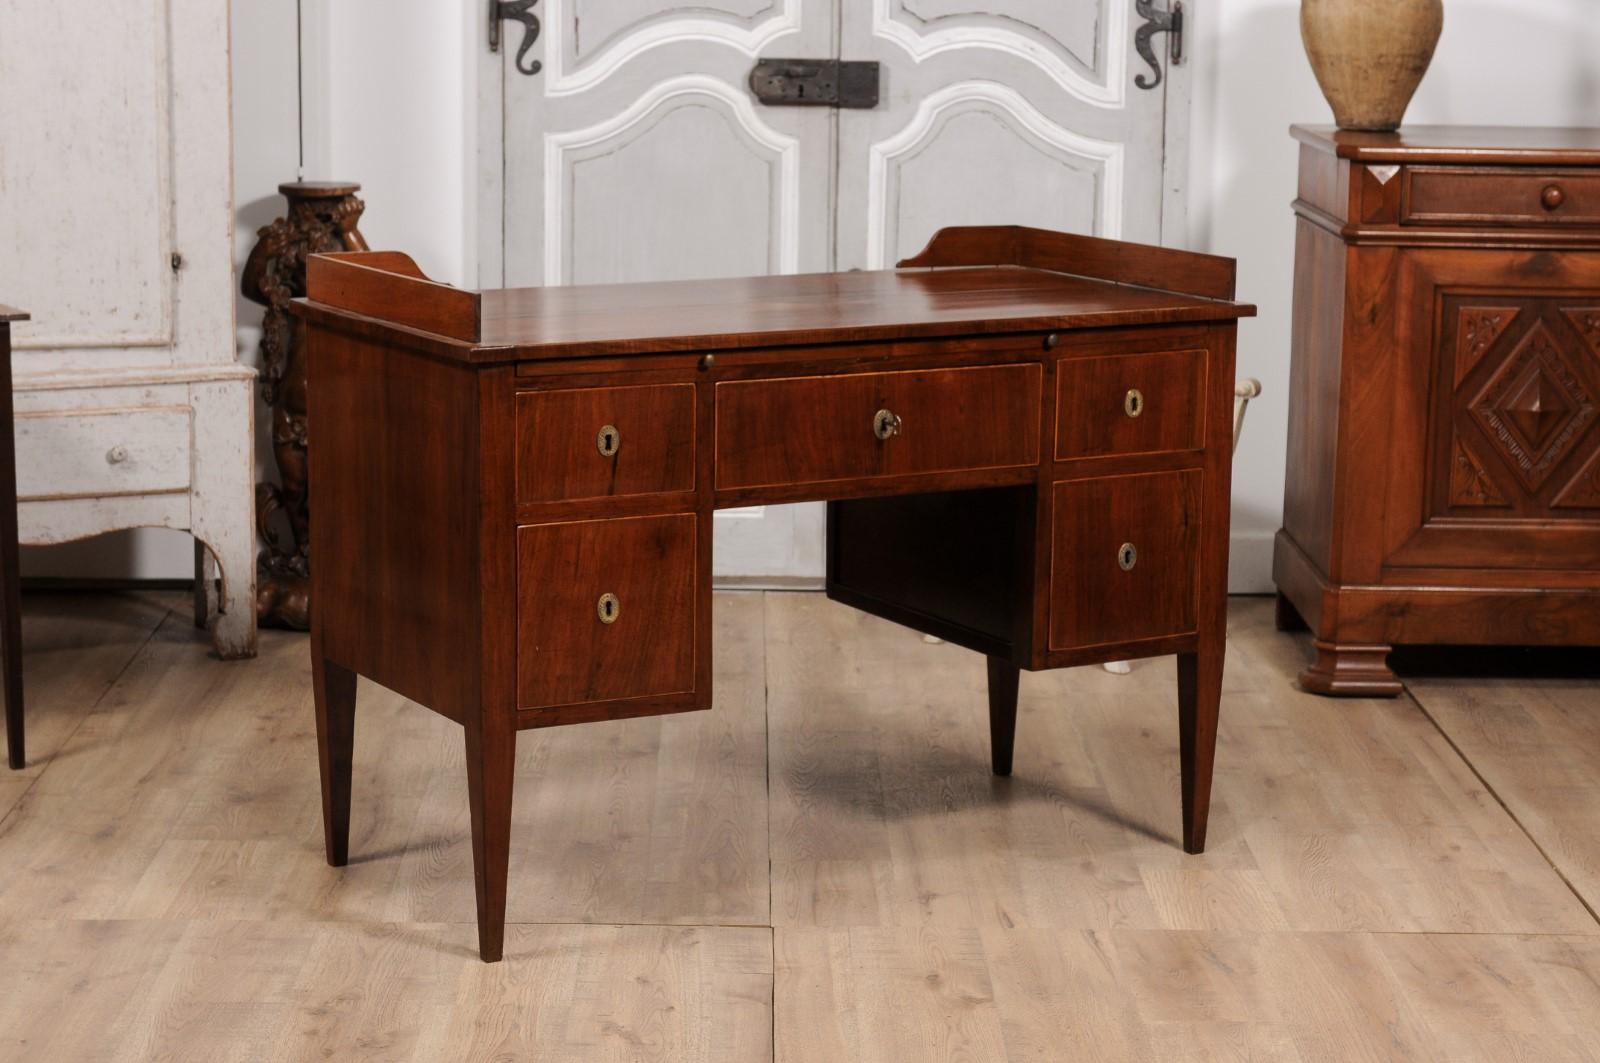 Italian 1820s Walnut and Mahogany Desk with Five Drawers, Pull-out and Banding In Good Condition For Sale In Atlanta, GA